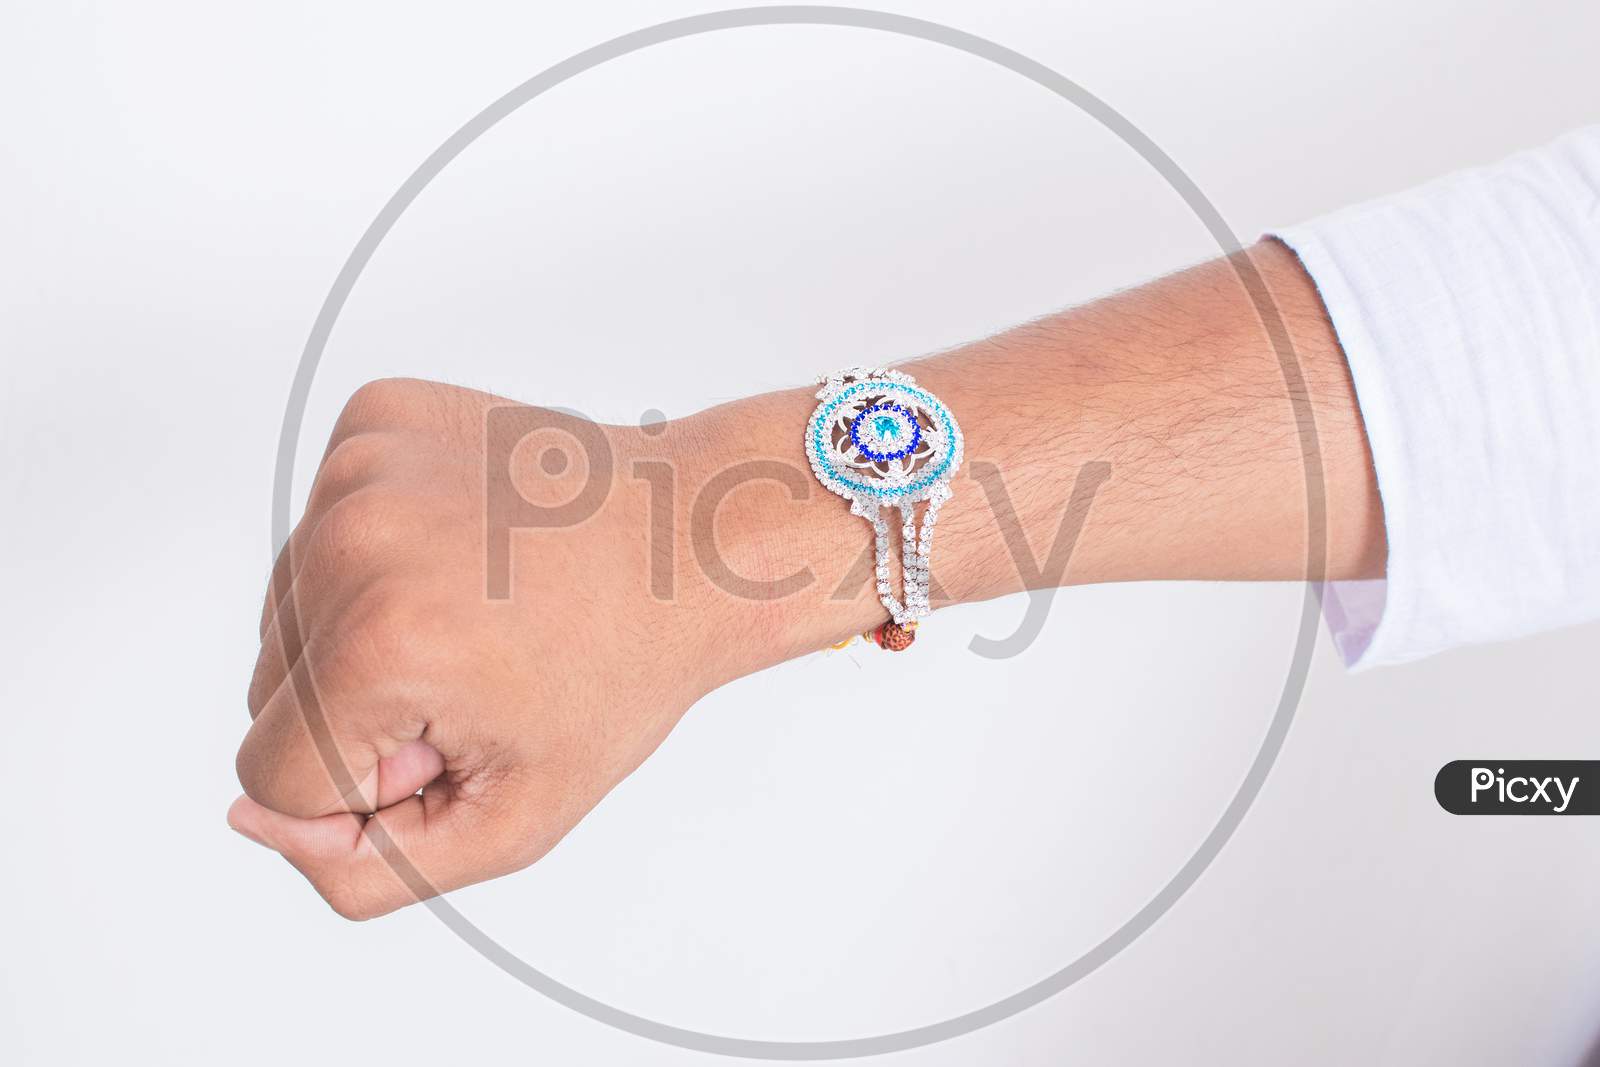 Hand Wearing Beautiful Blue Diamond Design Rakhi On The Occasion Of Raksha Bandhan Over White Background. Indian Festival Celebrated In India To Express Love And Bond Between Brother And Sister.